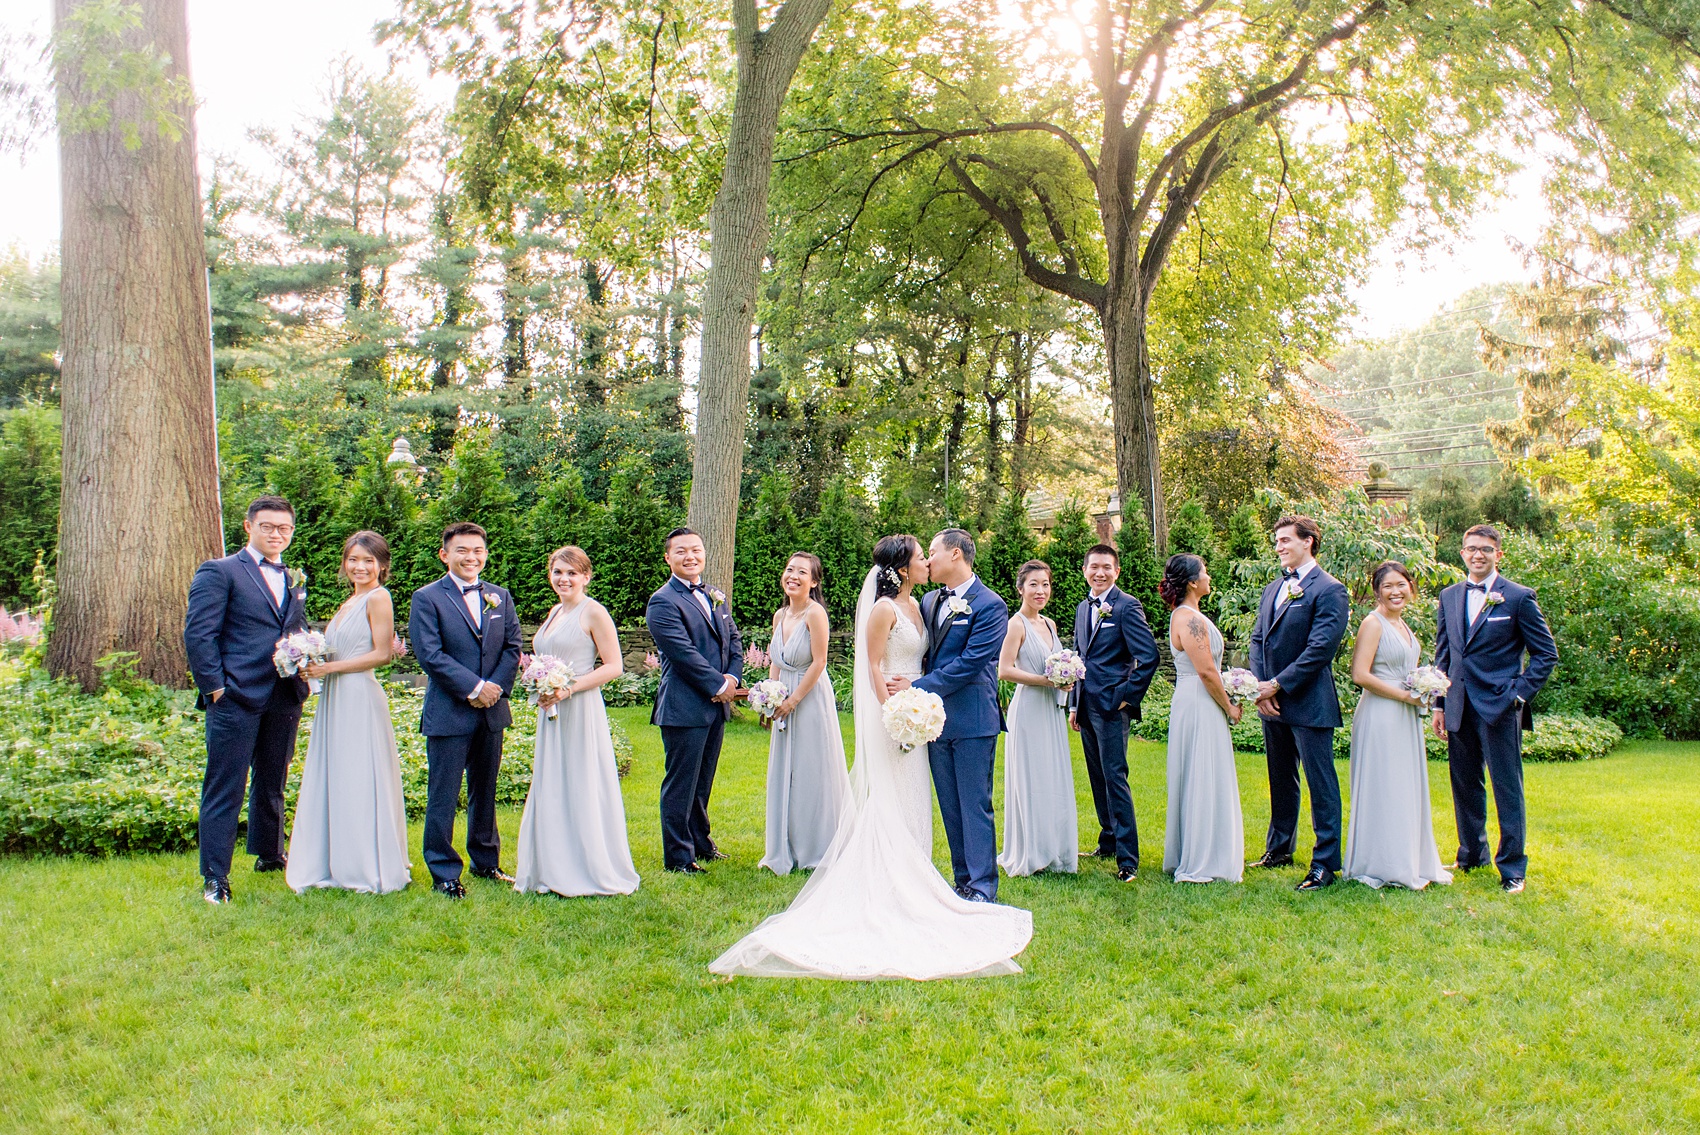 Mikkel Paige Photography pictures of a Westbury Manor wedding on Long Island. Photo of the bridal party in blue-grey gowns and groomsmen in navy.